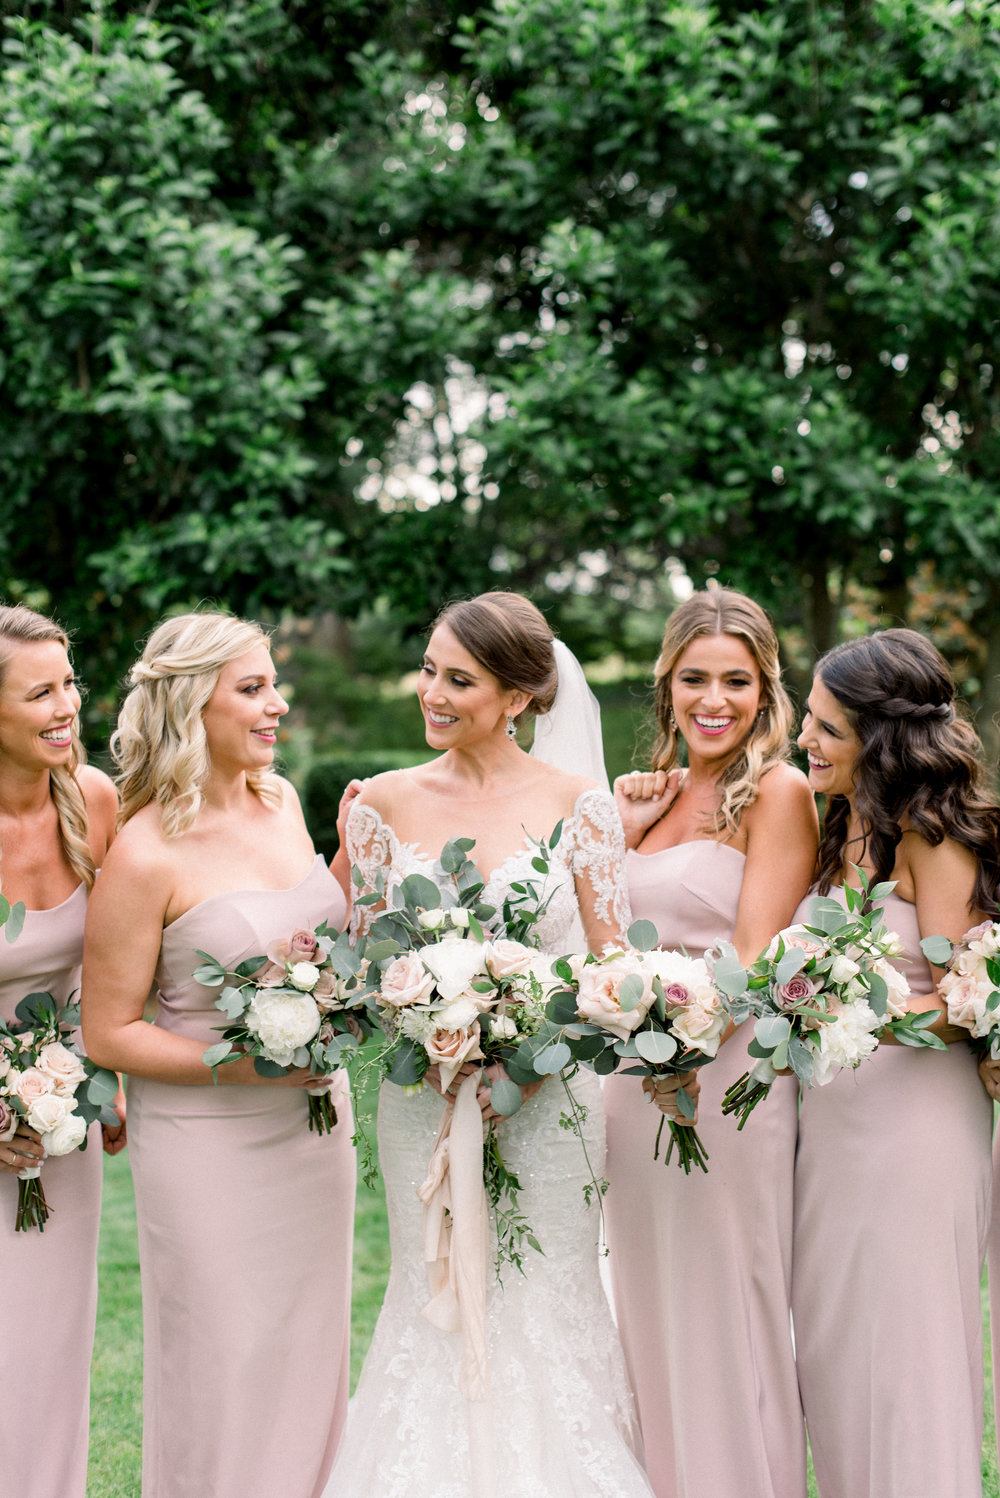 New England Manor Wedding with Champagne and Green Hues ⋆ Ruffled